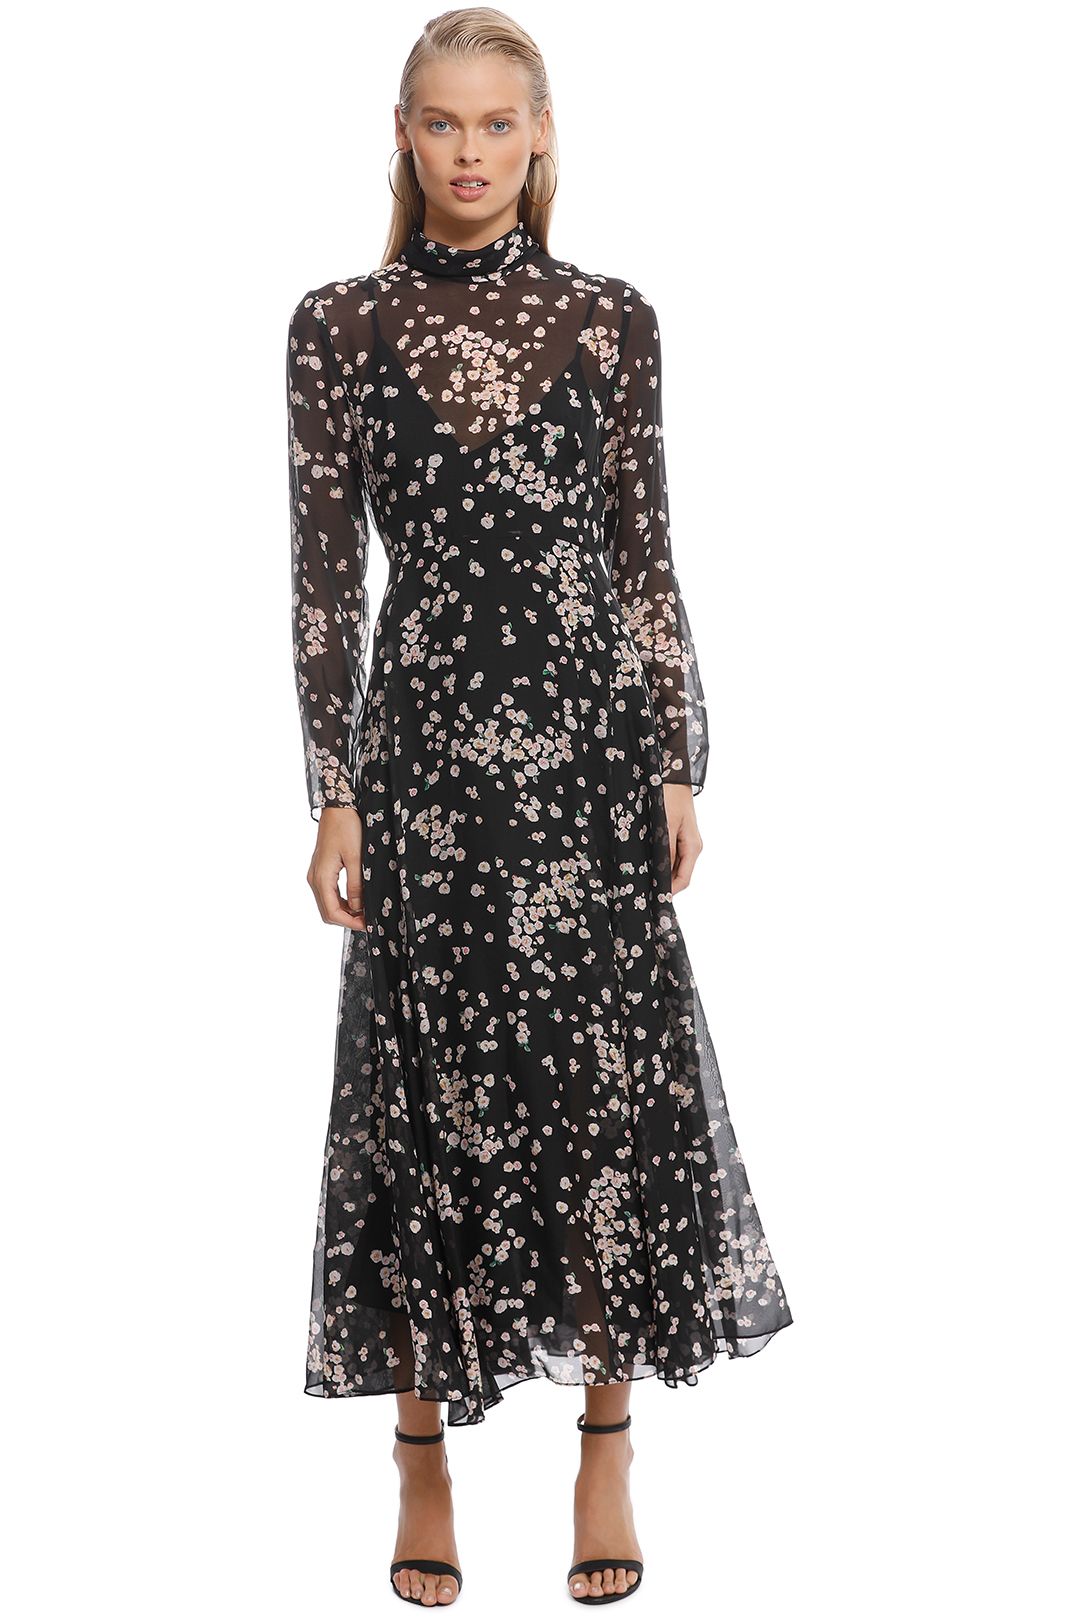 Camilla and Marc - Gardin Dress - Black Floral - Front